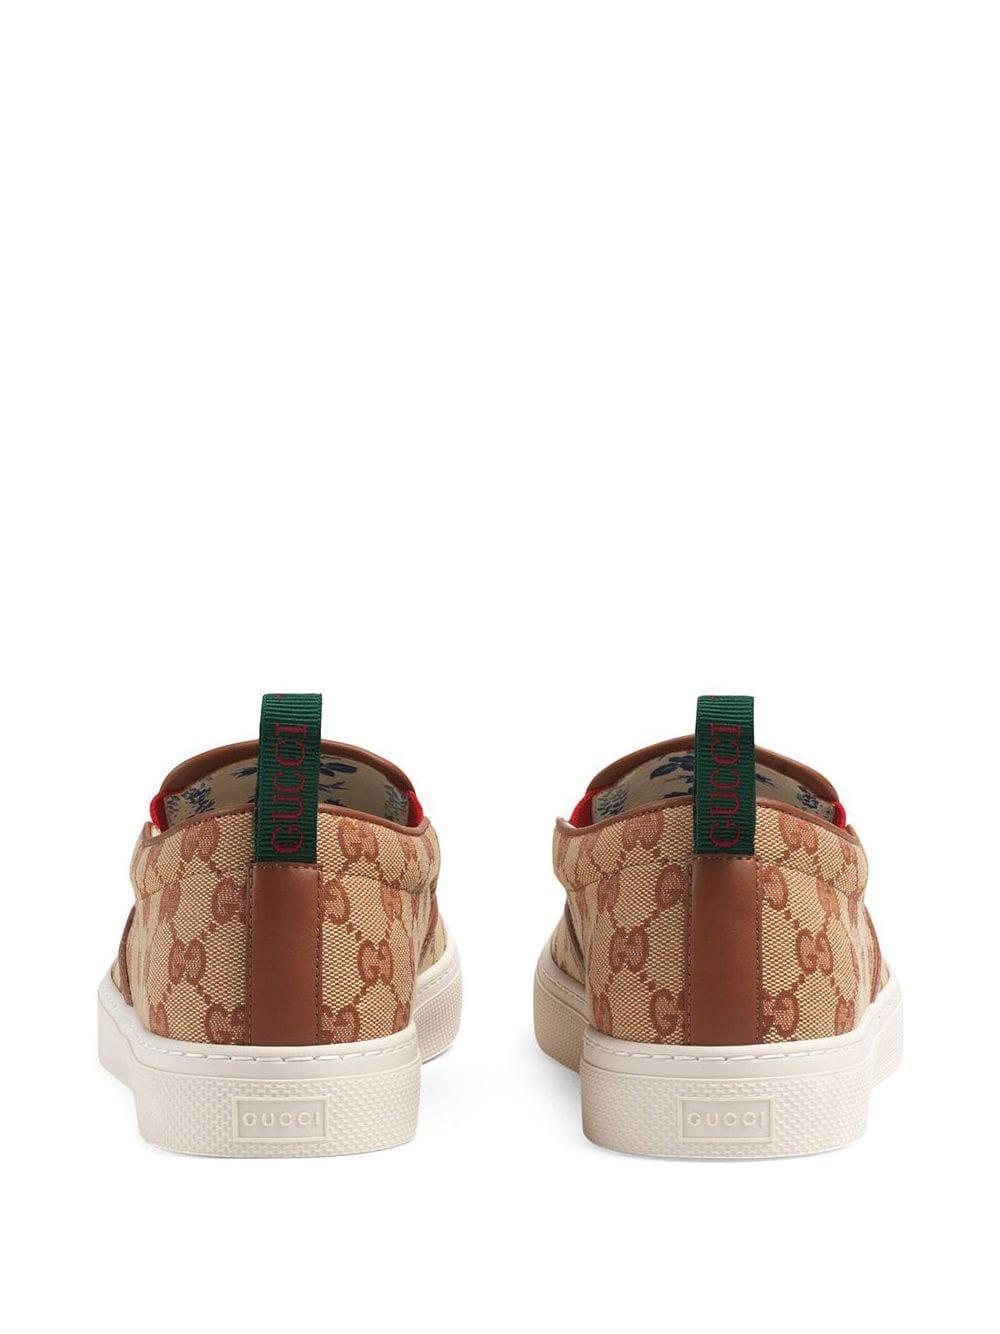 Gucci Canvas Men's Slip-on Sneaker With Ny Yankees Patchtm in 